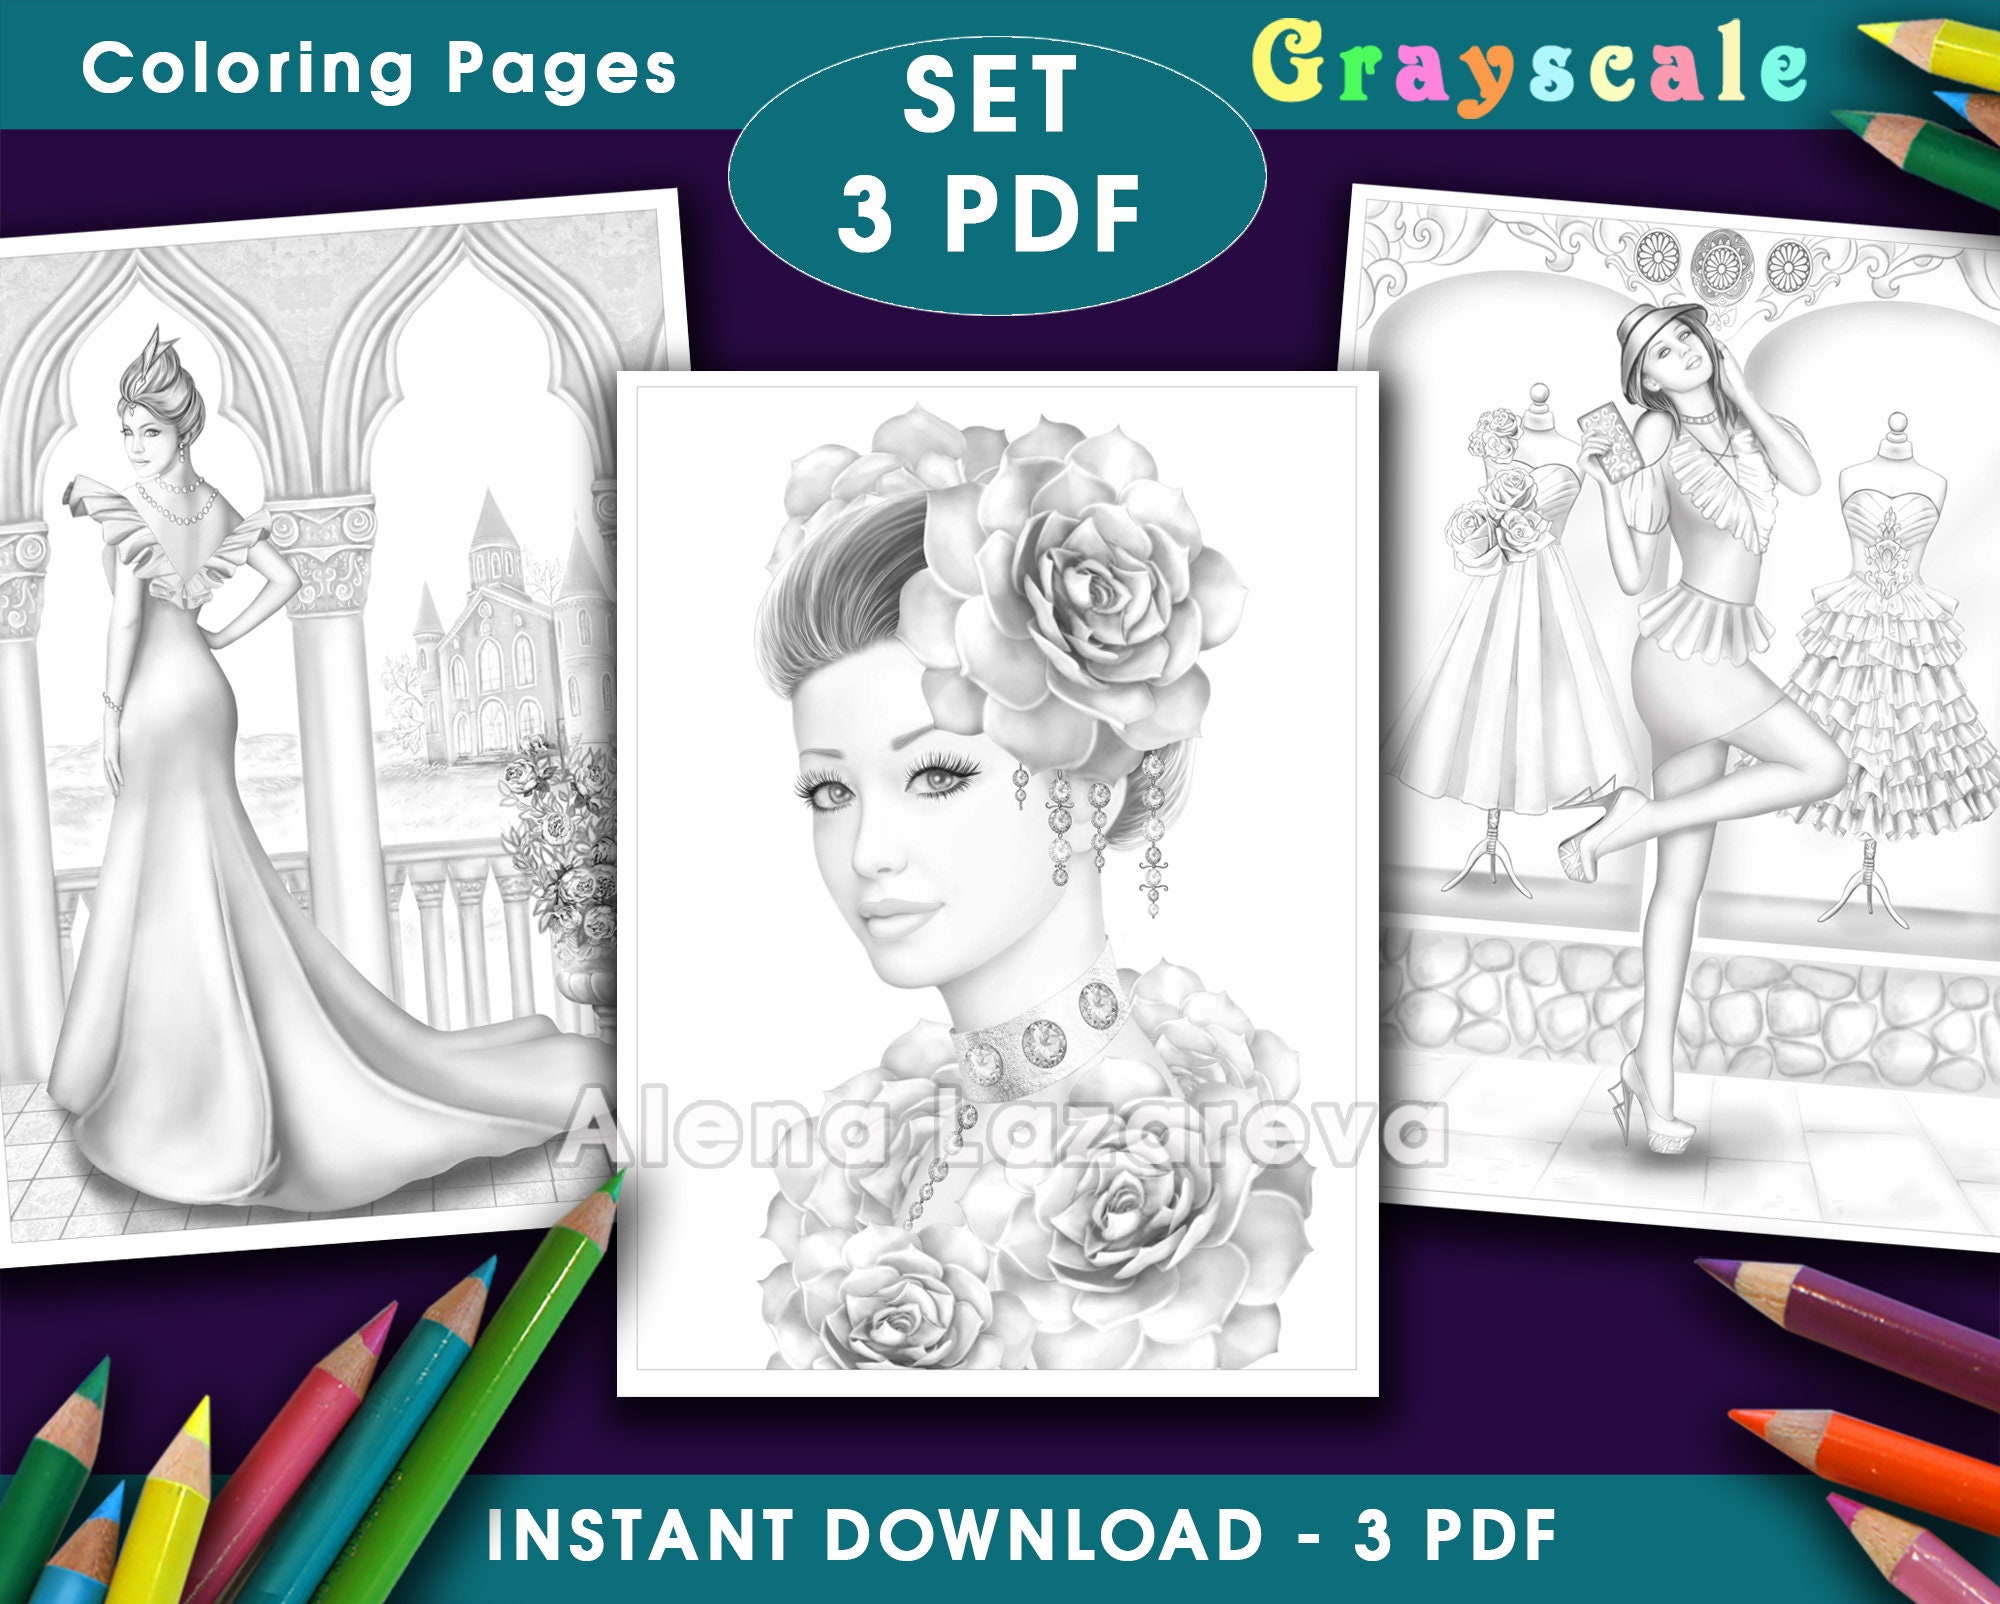 Download Coloring Pages 3 Pdf Grayscale Ladies Fashion Life Adult Etsy